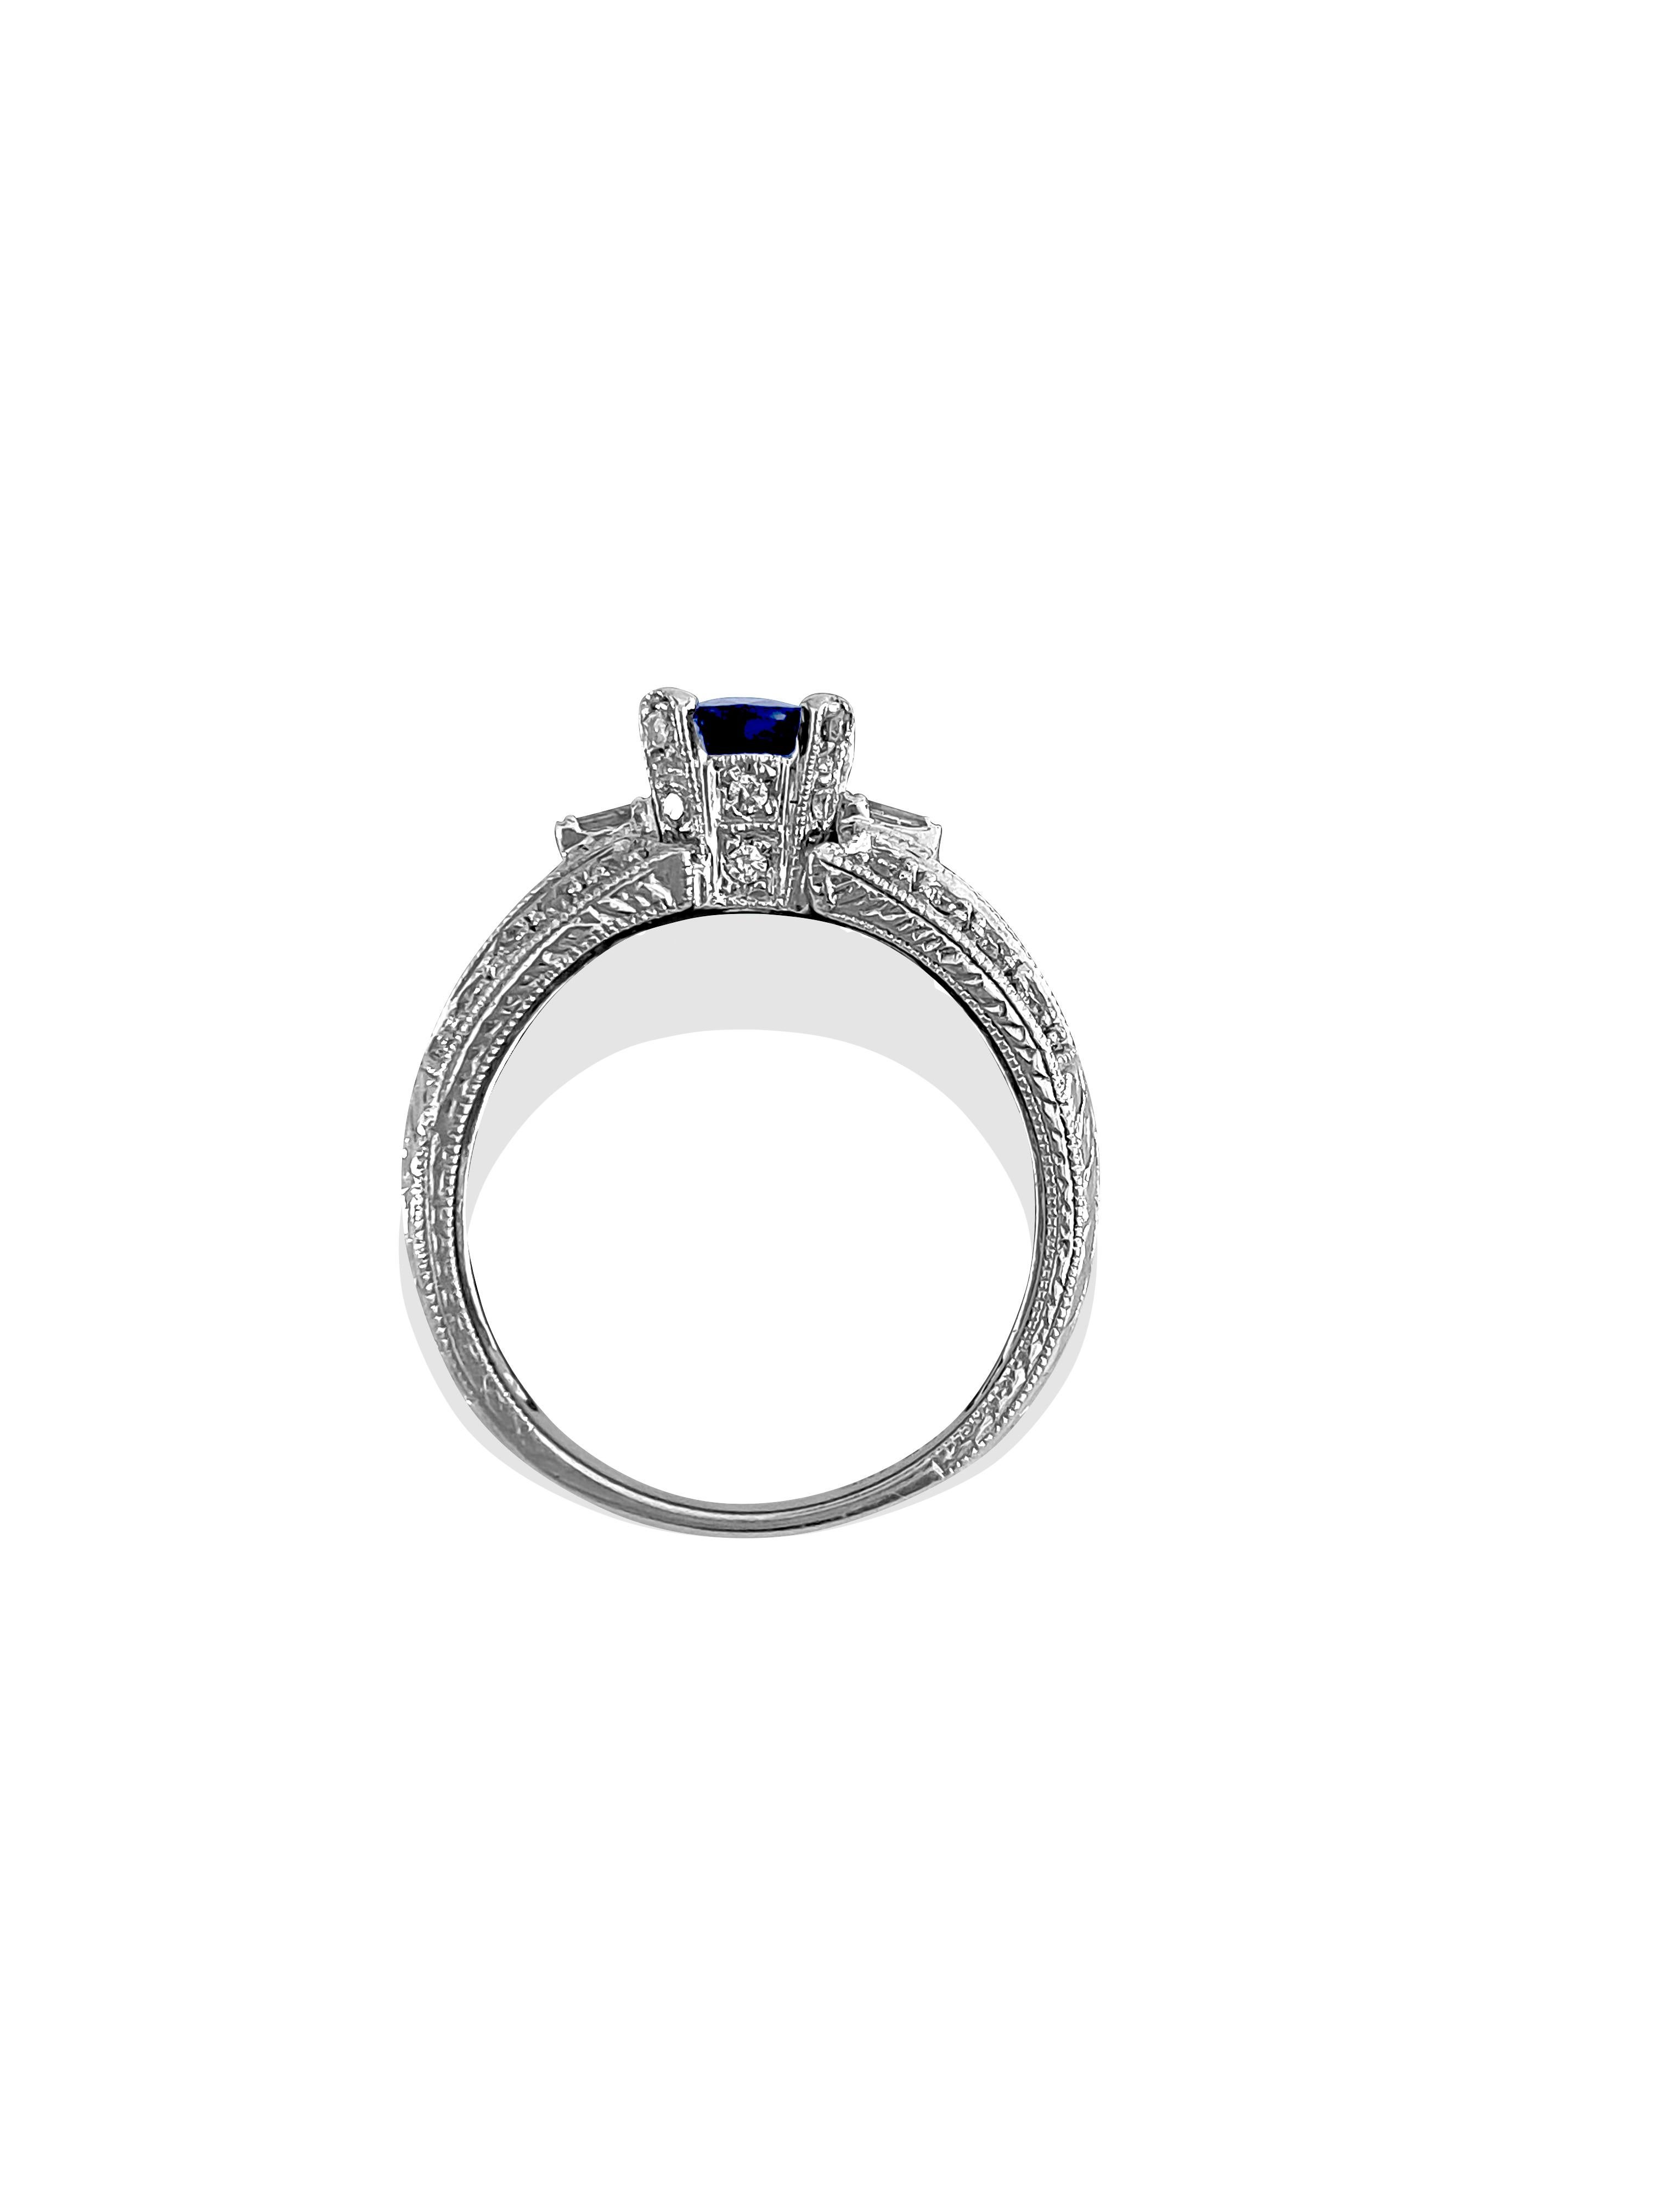 1.50 Carat Natural Blue Sapphire and Diamond Ring In Excellent Condition For Sale In Miami, FL